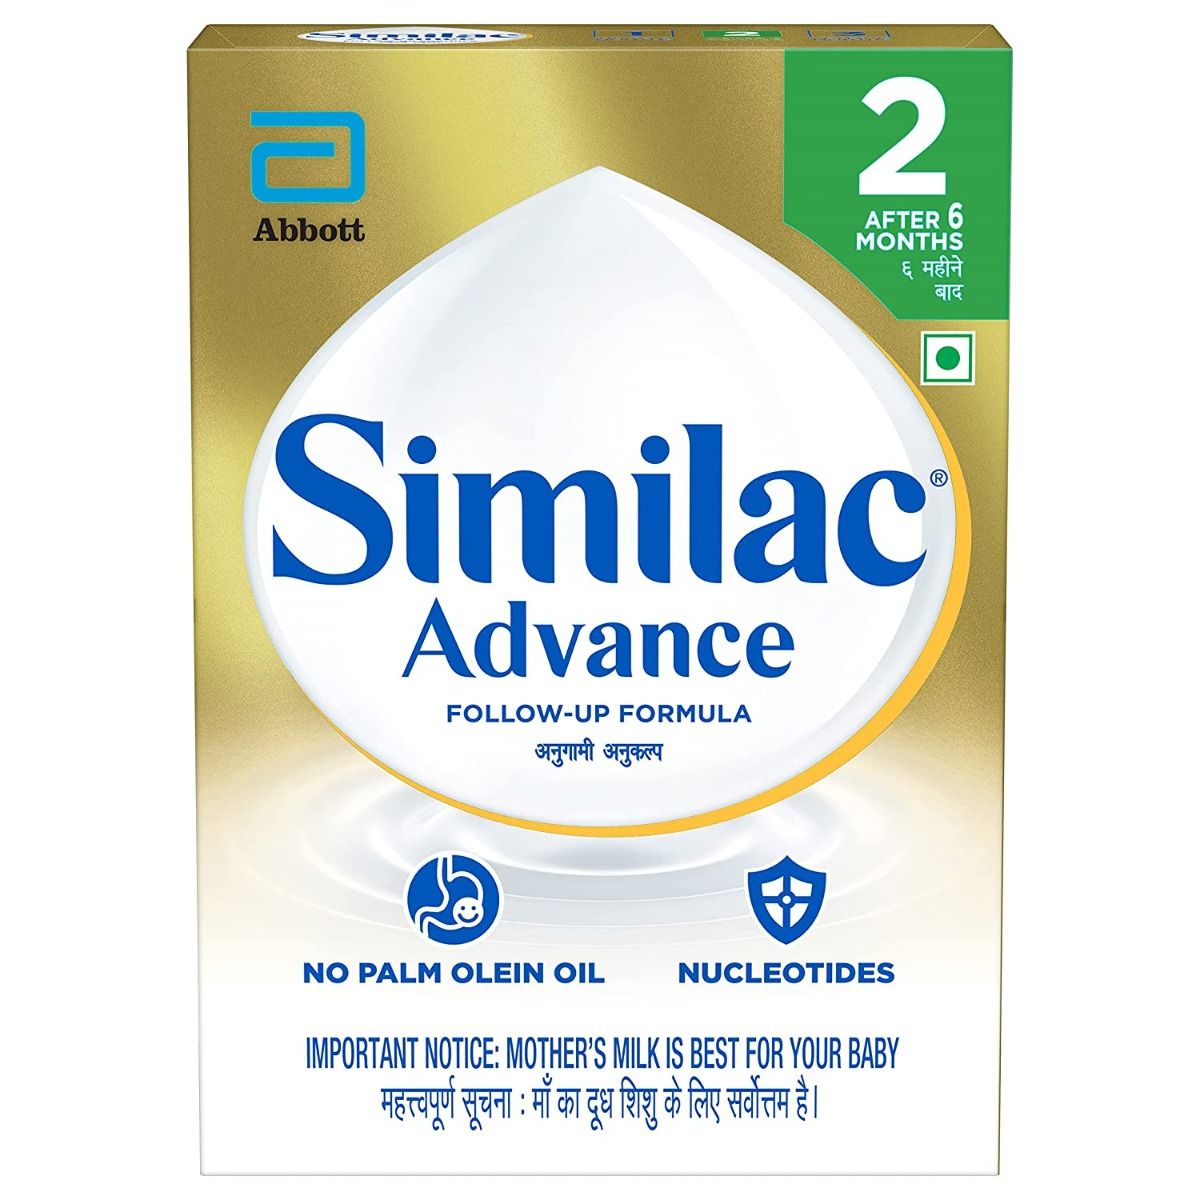 Similac Advance Follow-Up Formula Stage 2, After 6 Months, 400 gm Refill Pack, Pack of 1 